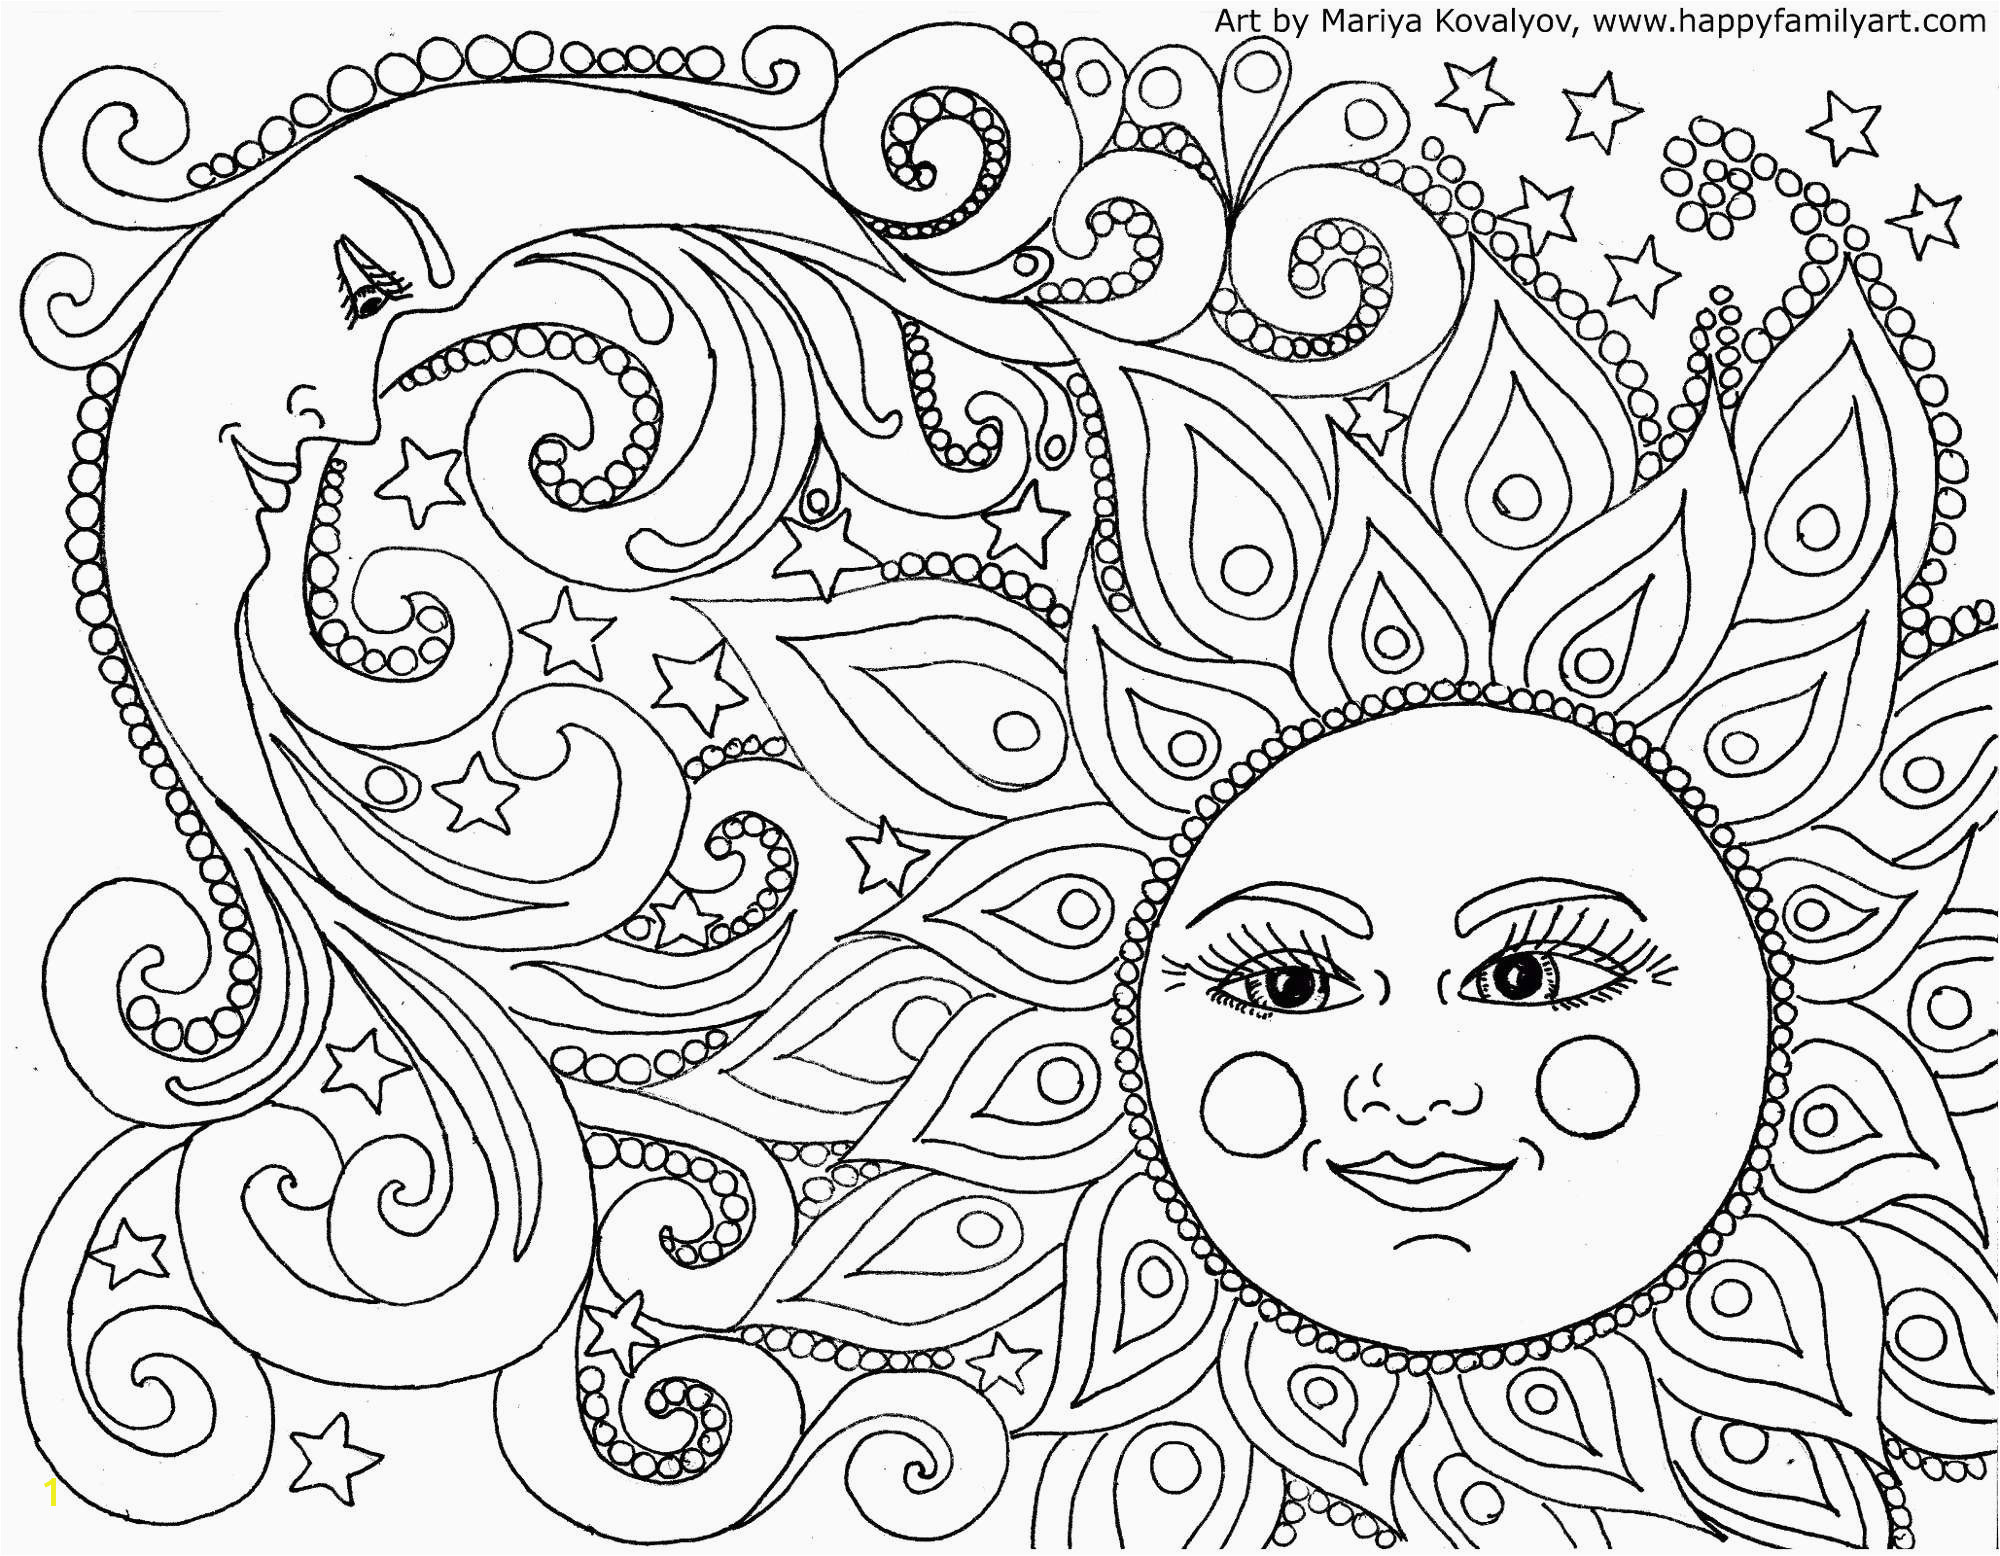 Colering Seiten Herrliche Christmas Coloring In Pages Free Cool Coloring Printables 0d Fun